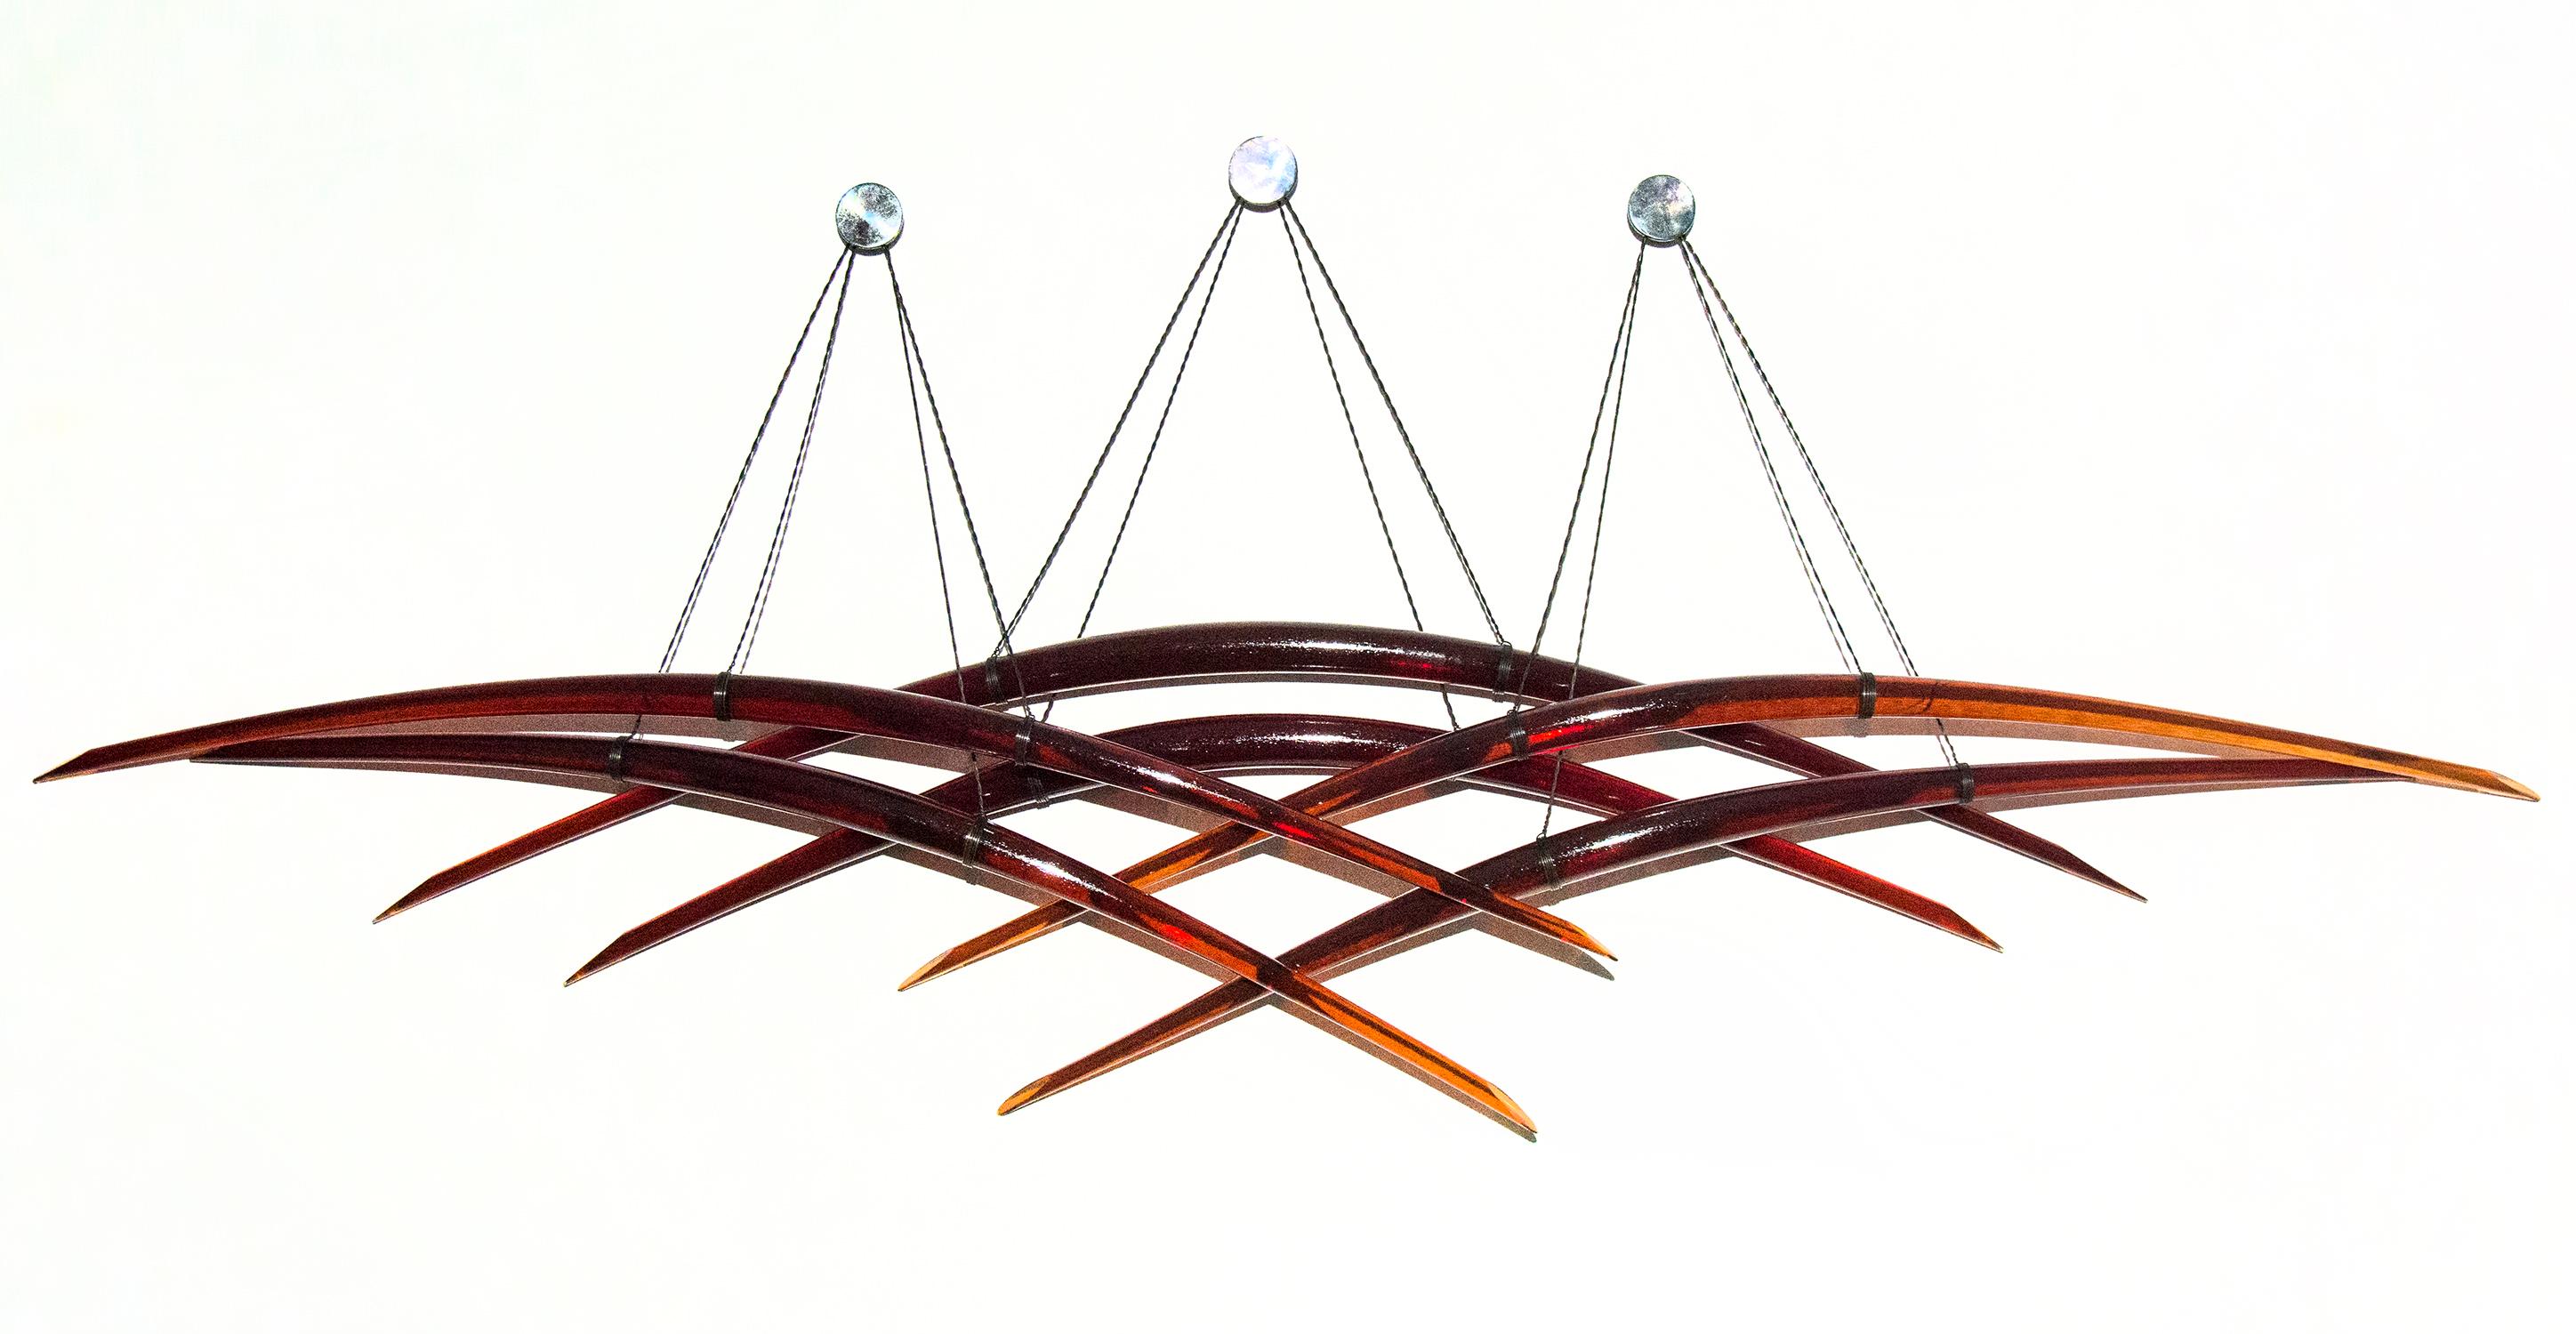 Probability R - red glass, copper, translucent abstract suspended wall sculpture - Sculpture by John Paul Robinson